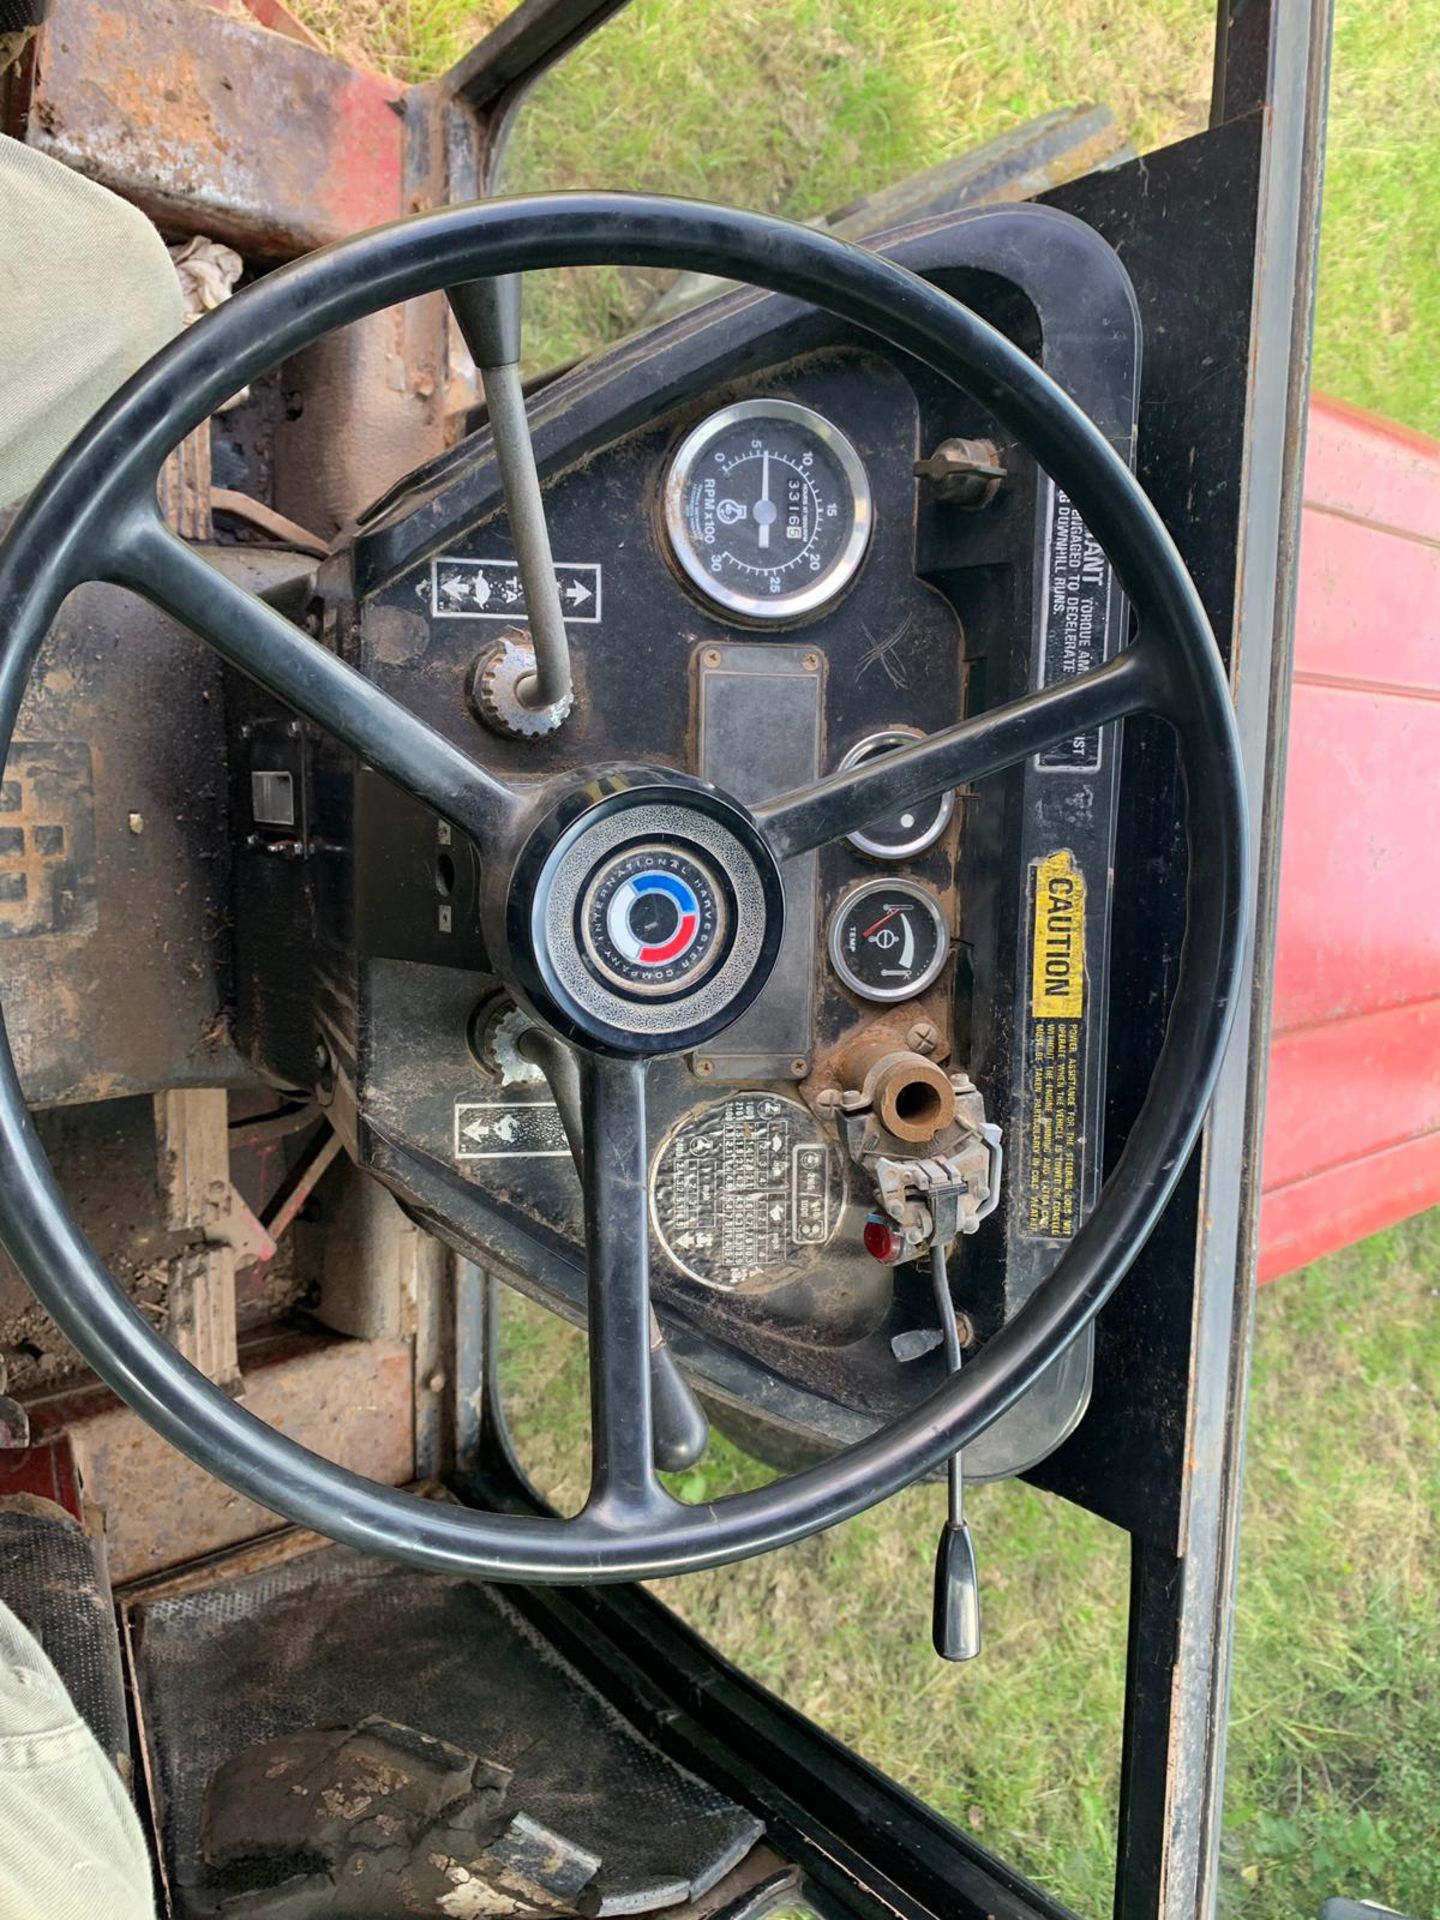 RED INTERNATIONAL HARVESTER 784 DIESEL TRACTOR WITH FULL GLASS CAB, RUNS AND WORKS *PLUS VAT* - Image 10 of 13